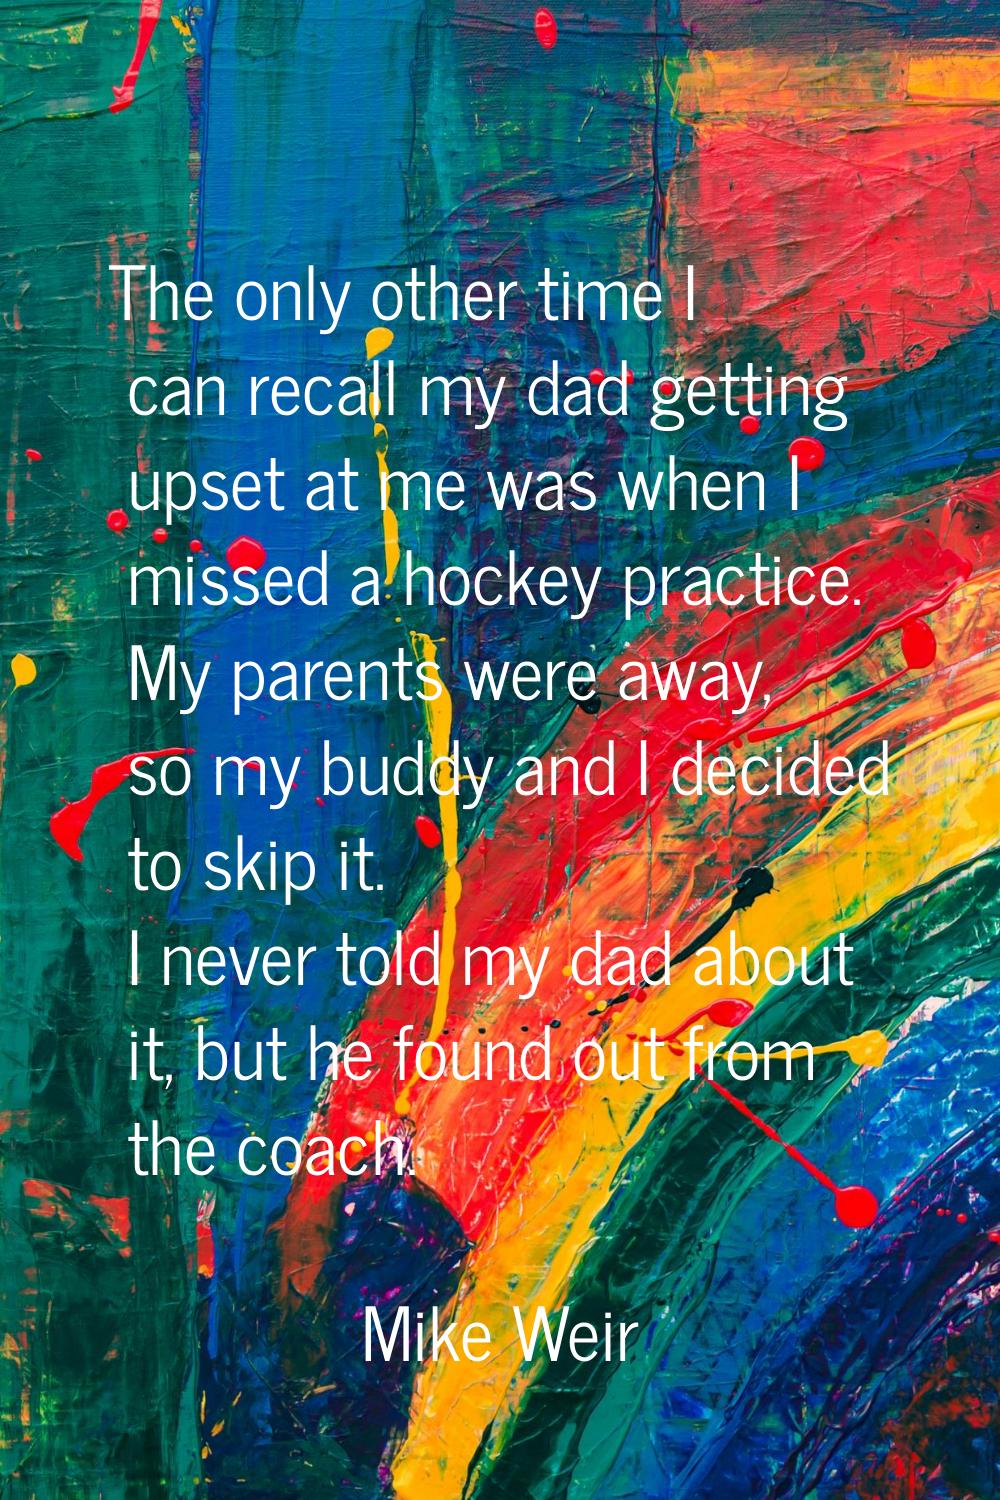 The only other time I can recall my dad getting upset at me was when I missed a hockey practice. My